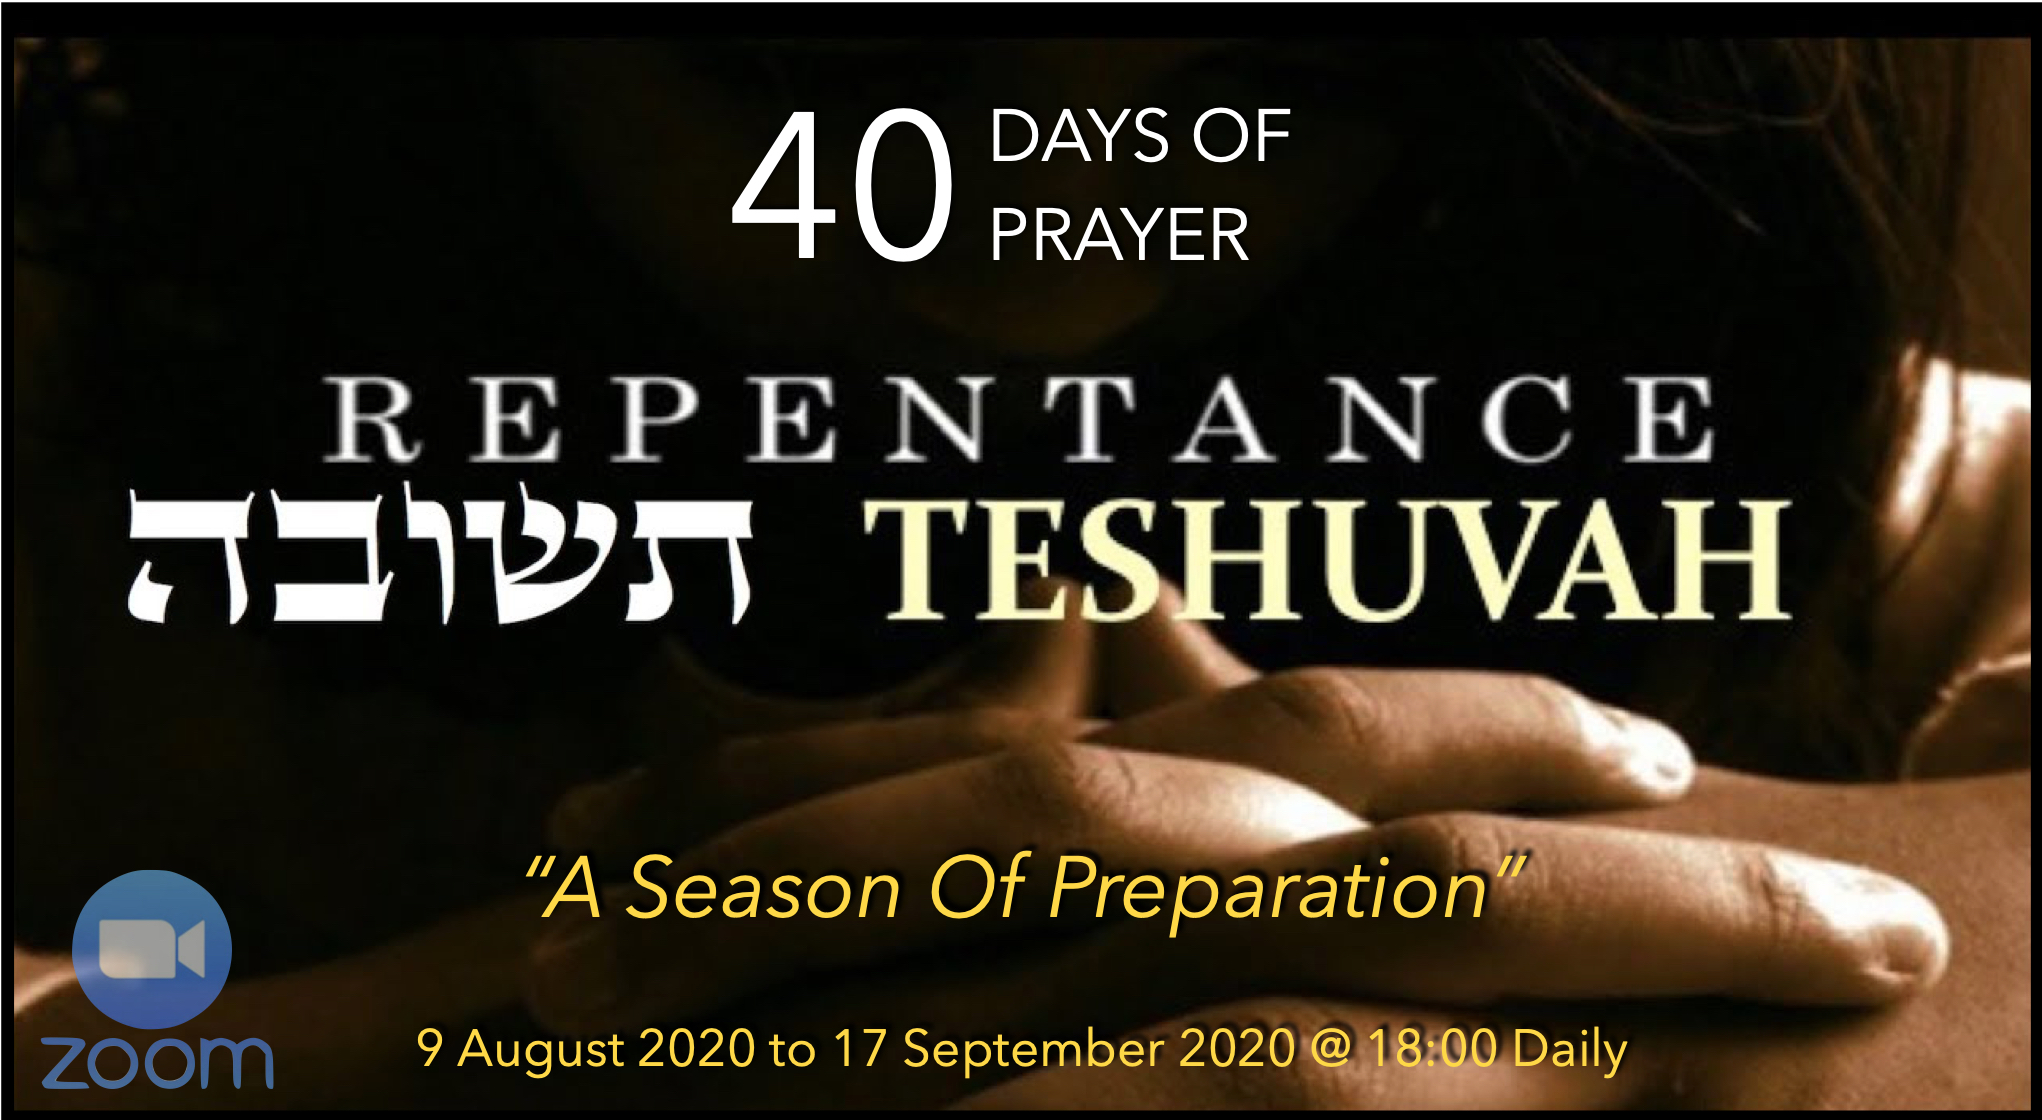 40-days-of-prayer-repentance-teshuvah-day-1-house-of-ariel-gate